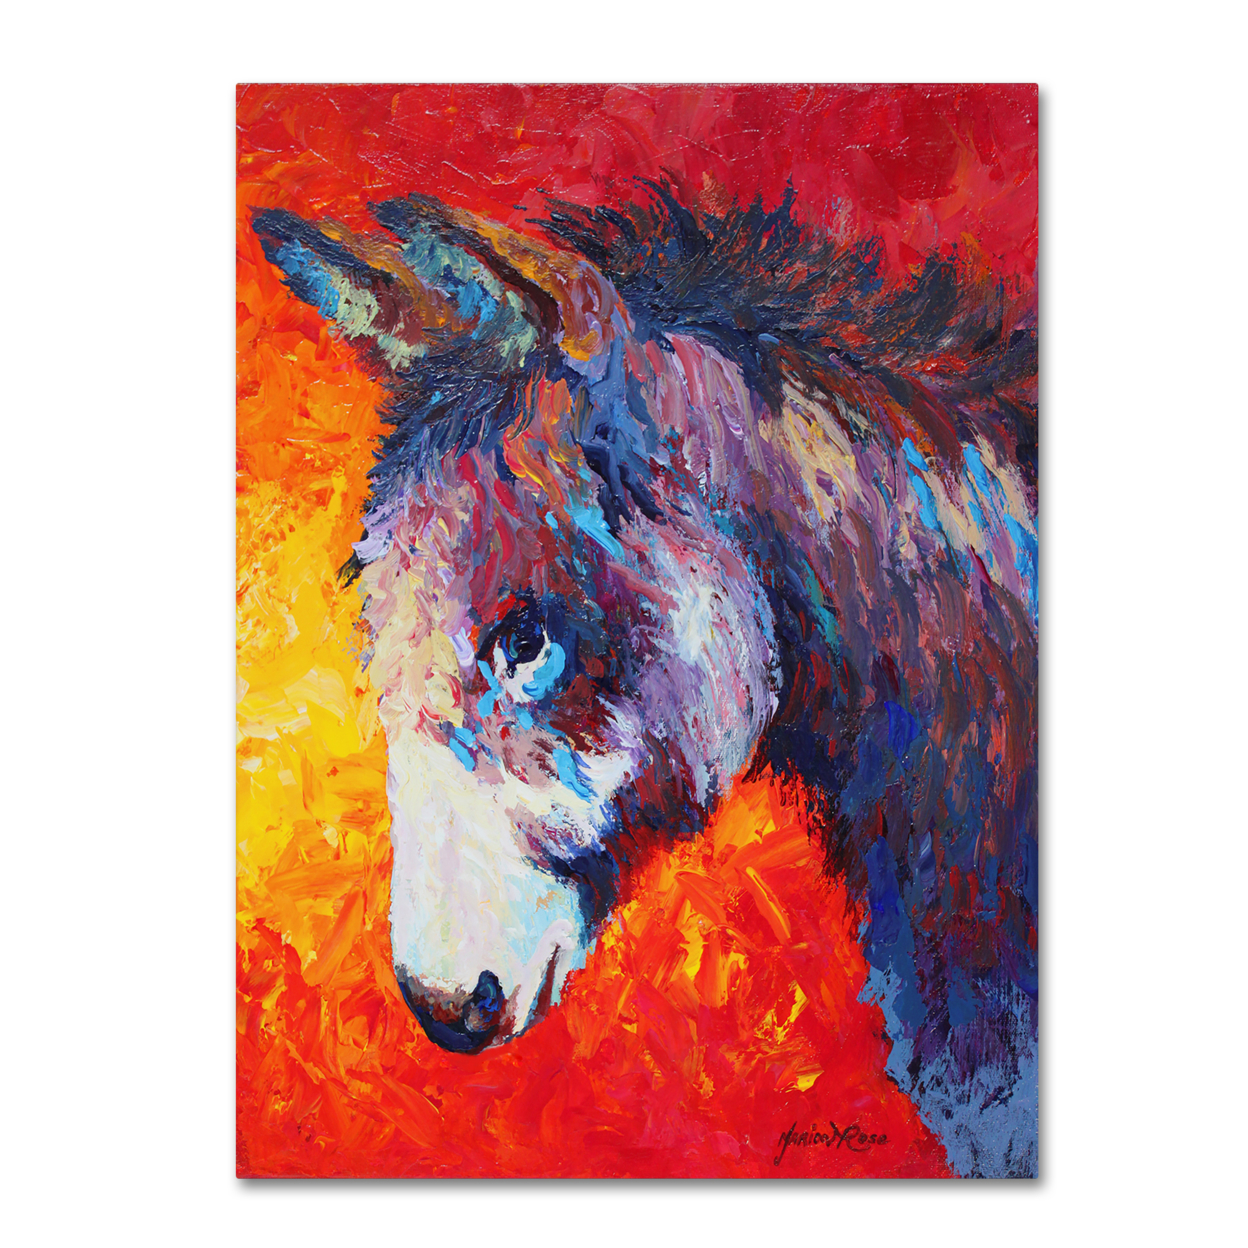 Marion Rose 'Donkey V' Ready To Hang Canvas Art 24 X 32 Inches Made In USA